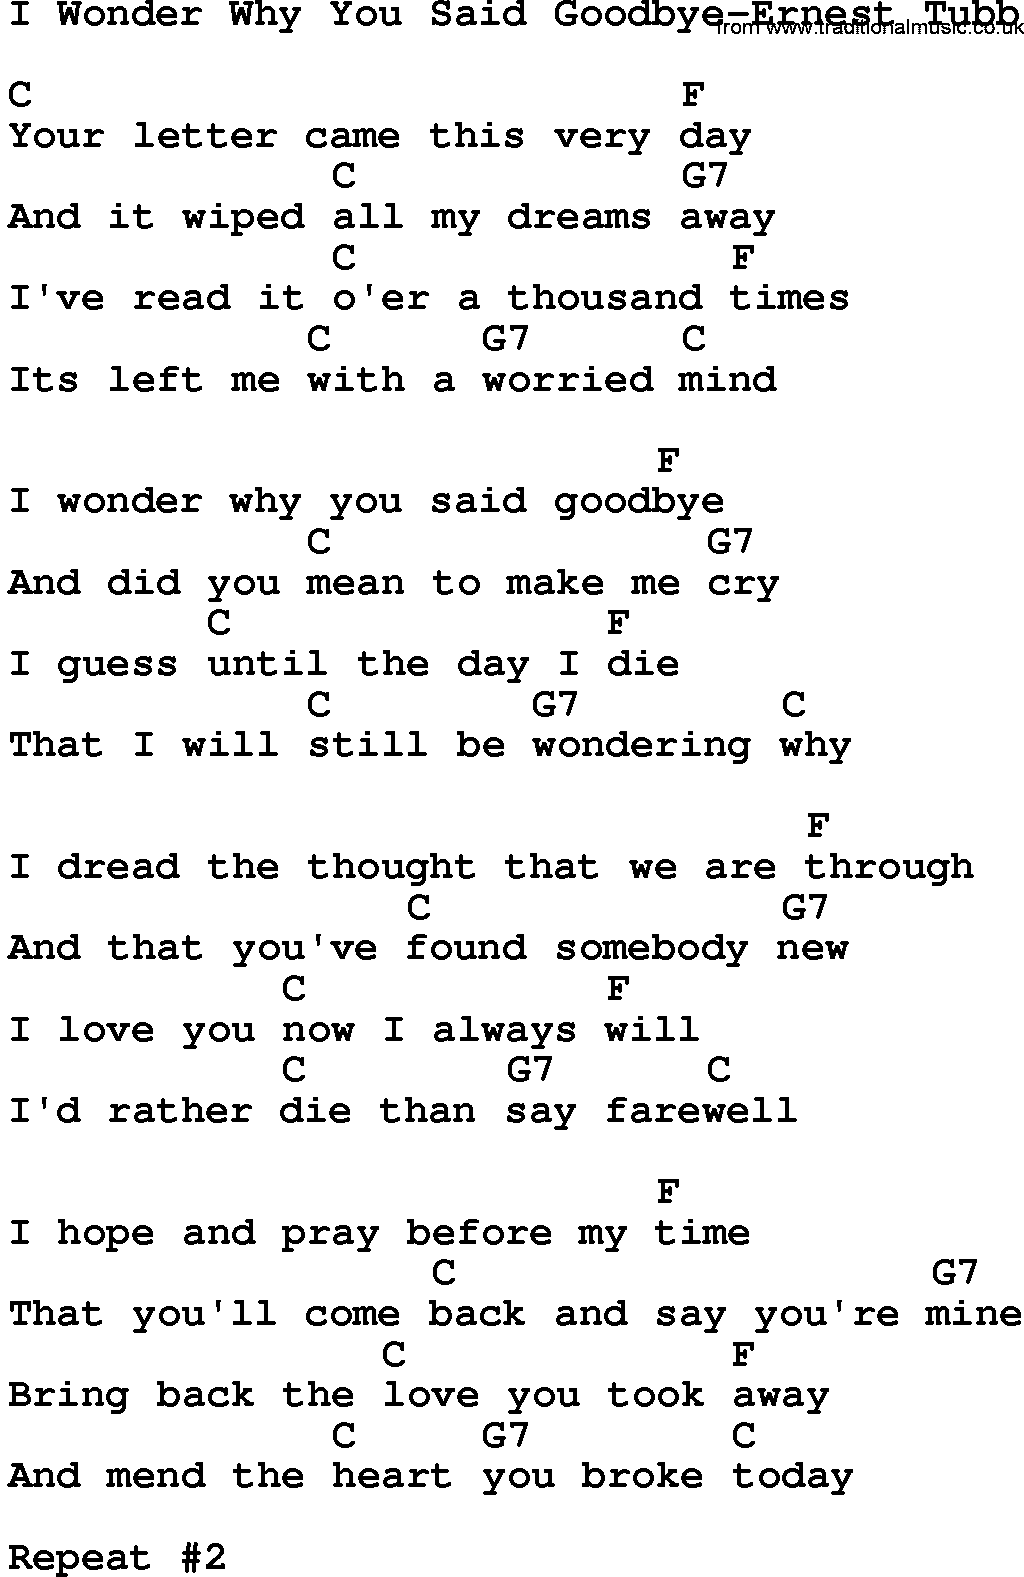 Country music song: I Wonder Why You Said Goodbye-Ernest Tubb lyrics and chords